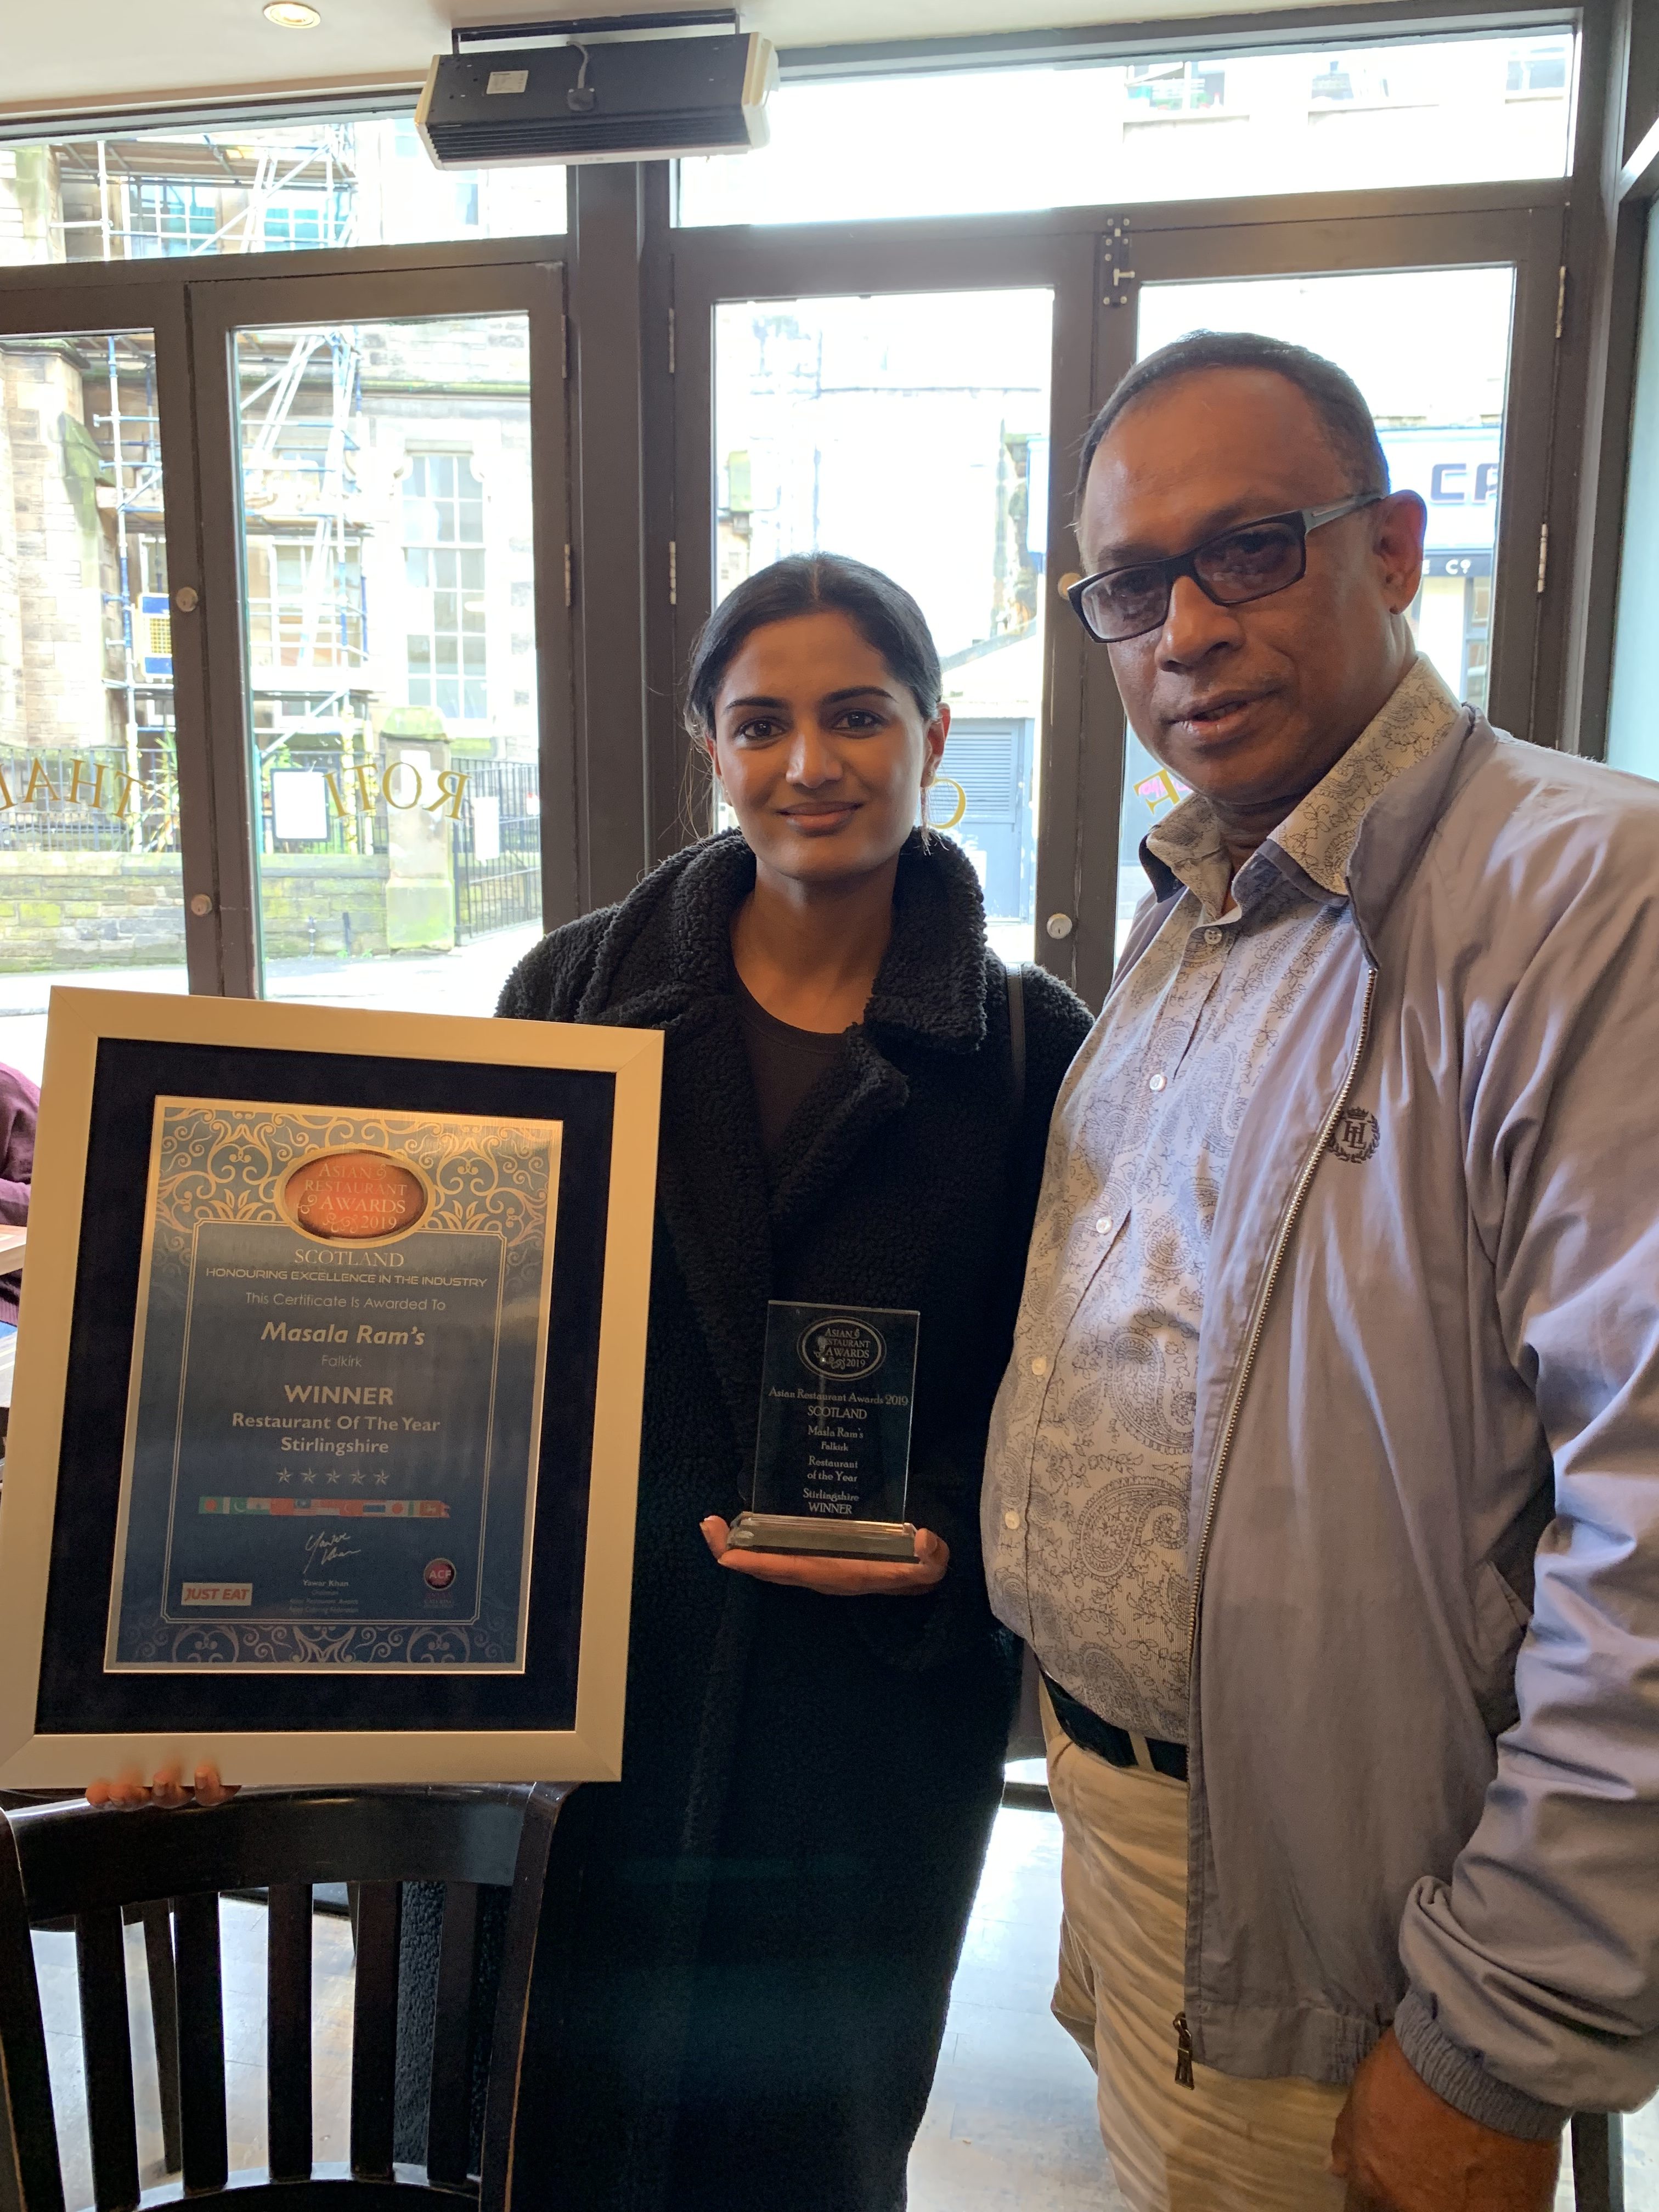 Masala Ram's | Restaurant of The Year - Stirlingshire